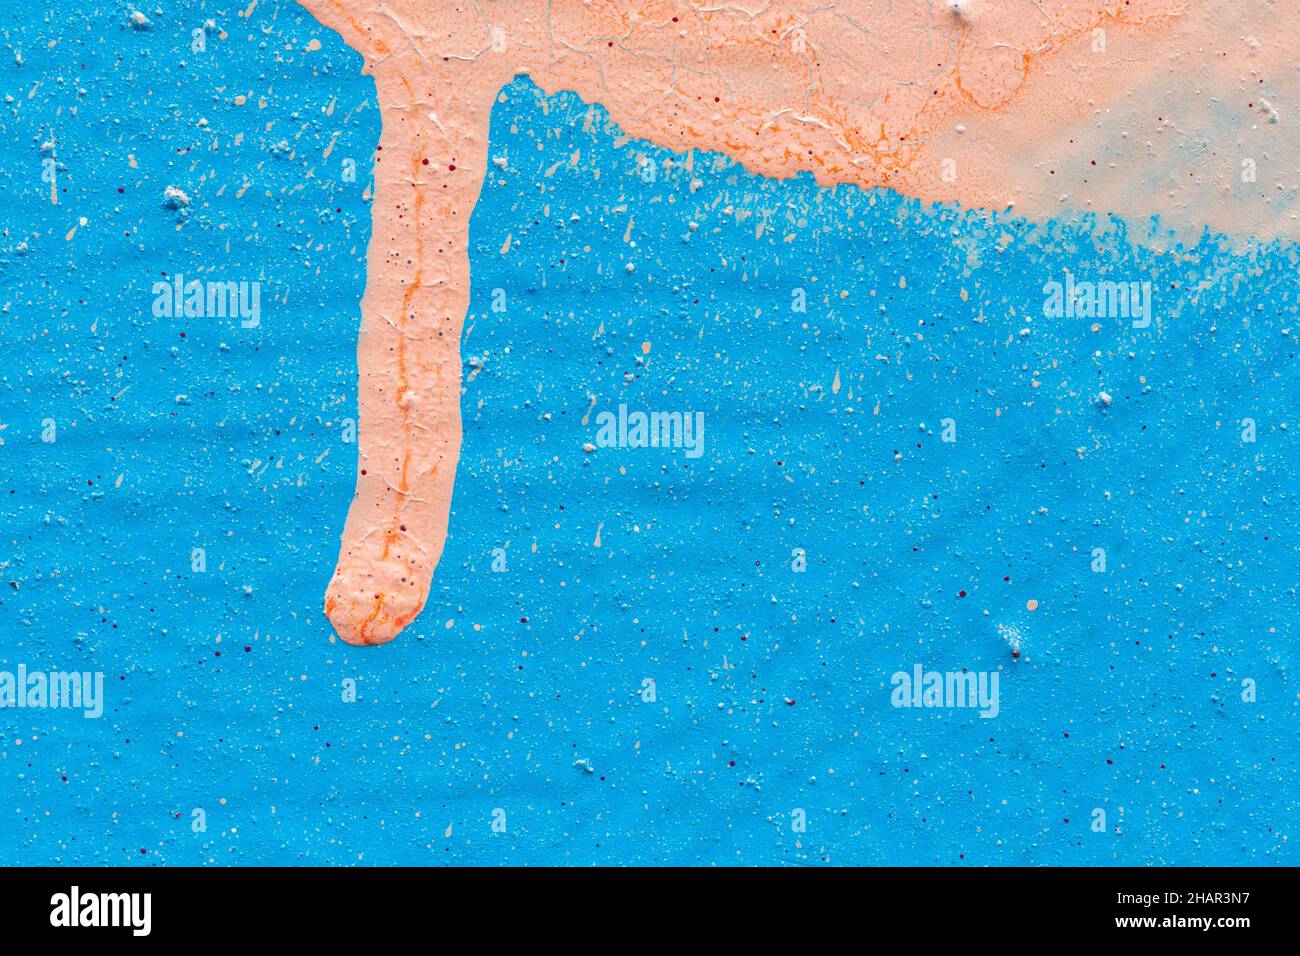 Macro close-up of a wall spray painted with light blue & sandy tan color. Spray paint splashes&drip. Abstract textured splattered graffiti background. Stock Photo